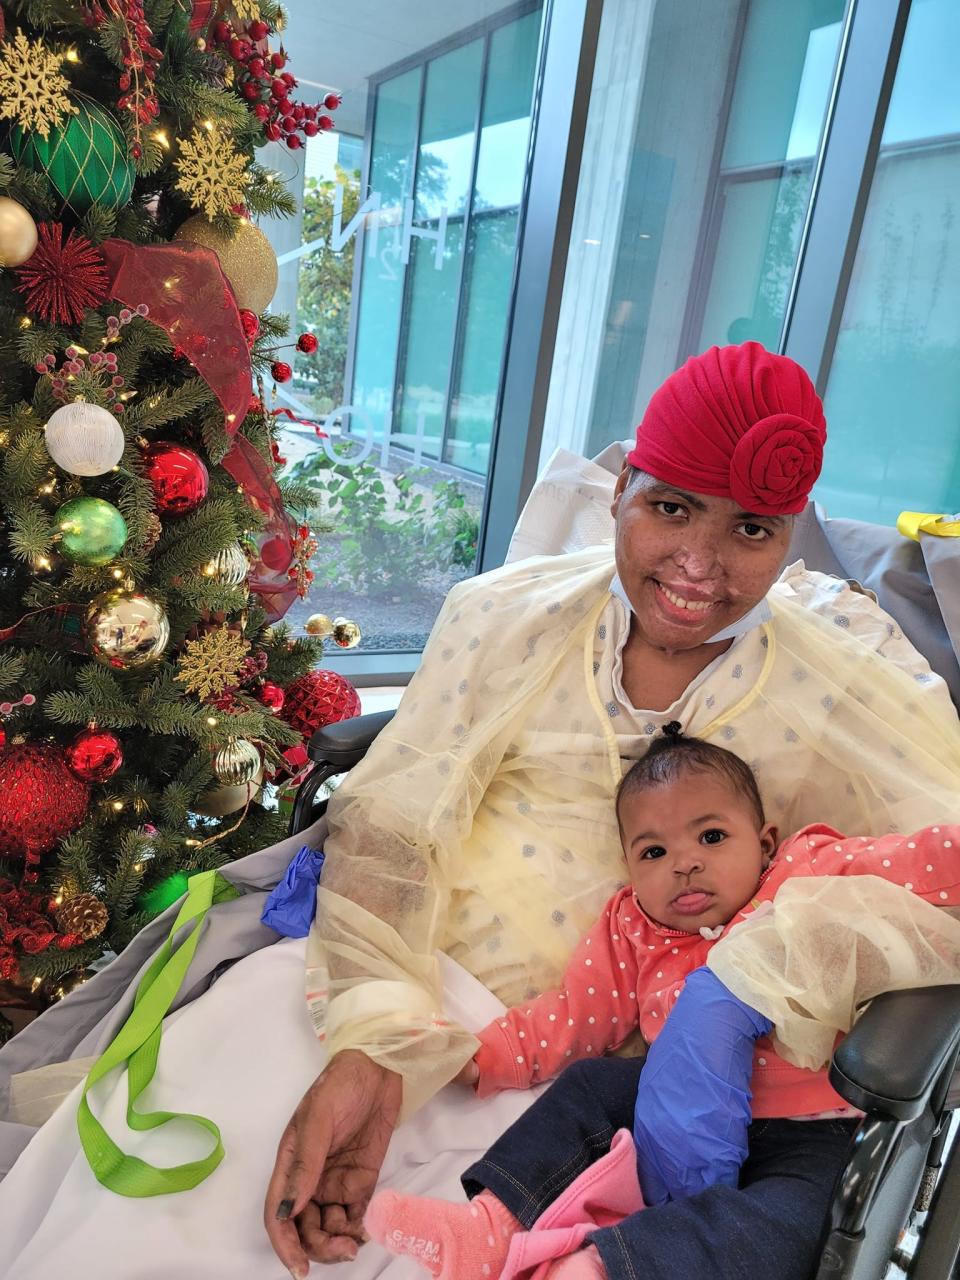 On Dec. 3, 2021, Maidelys Hernandez was finally able to have her daughter Elif visit her in the hospital.